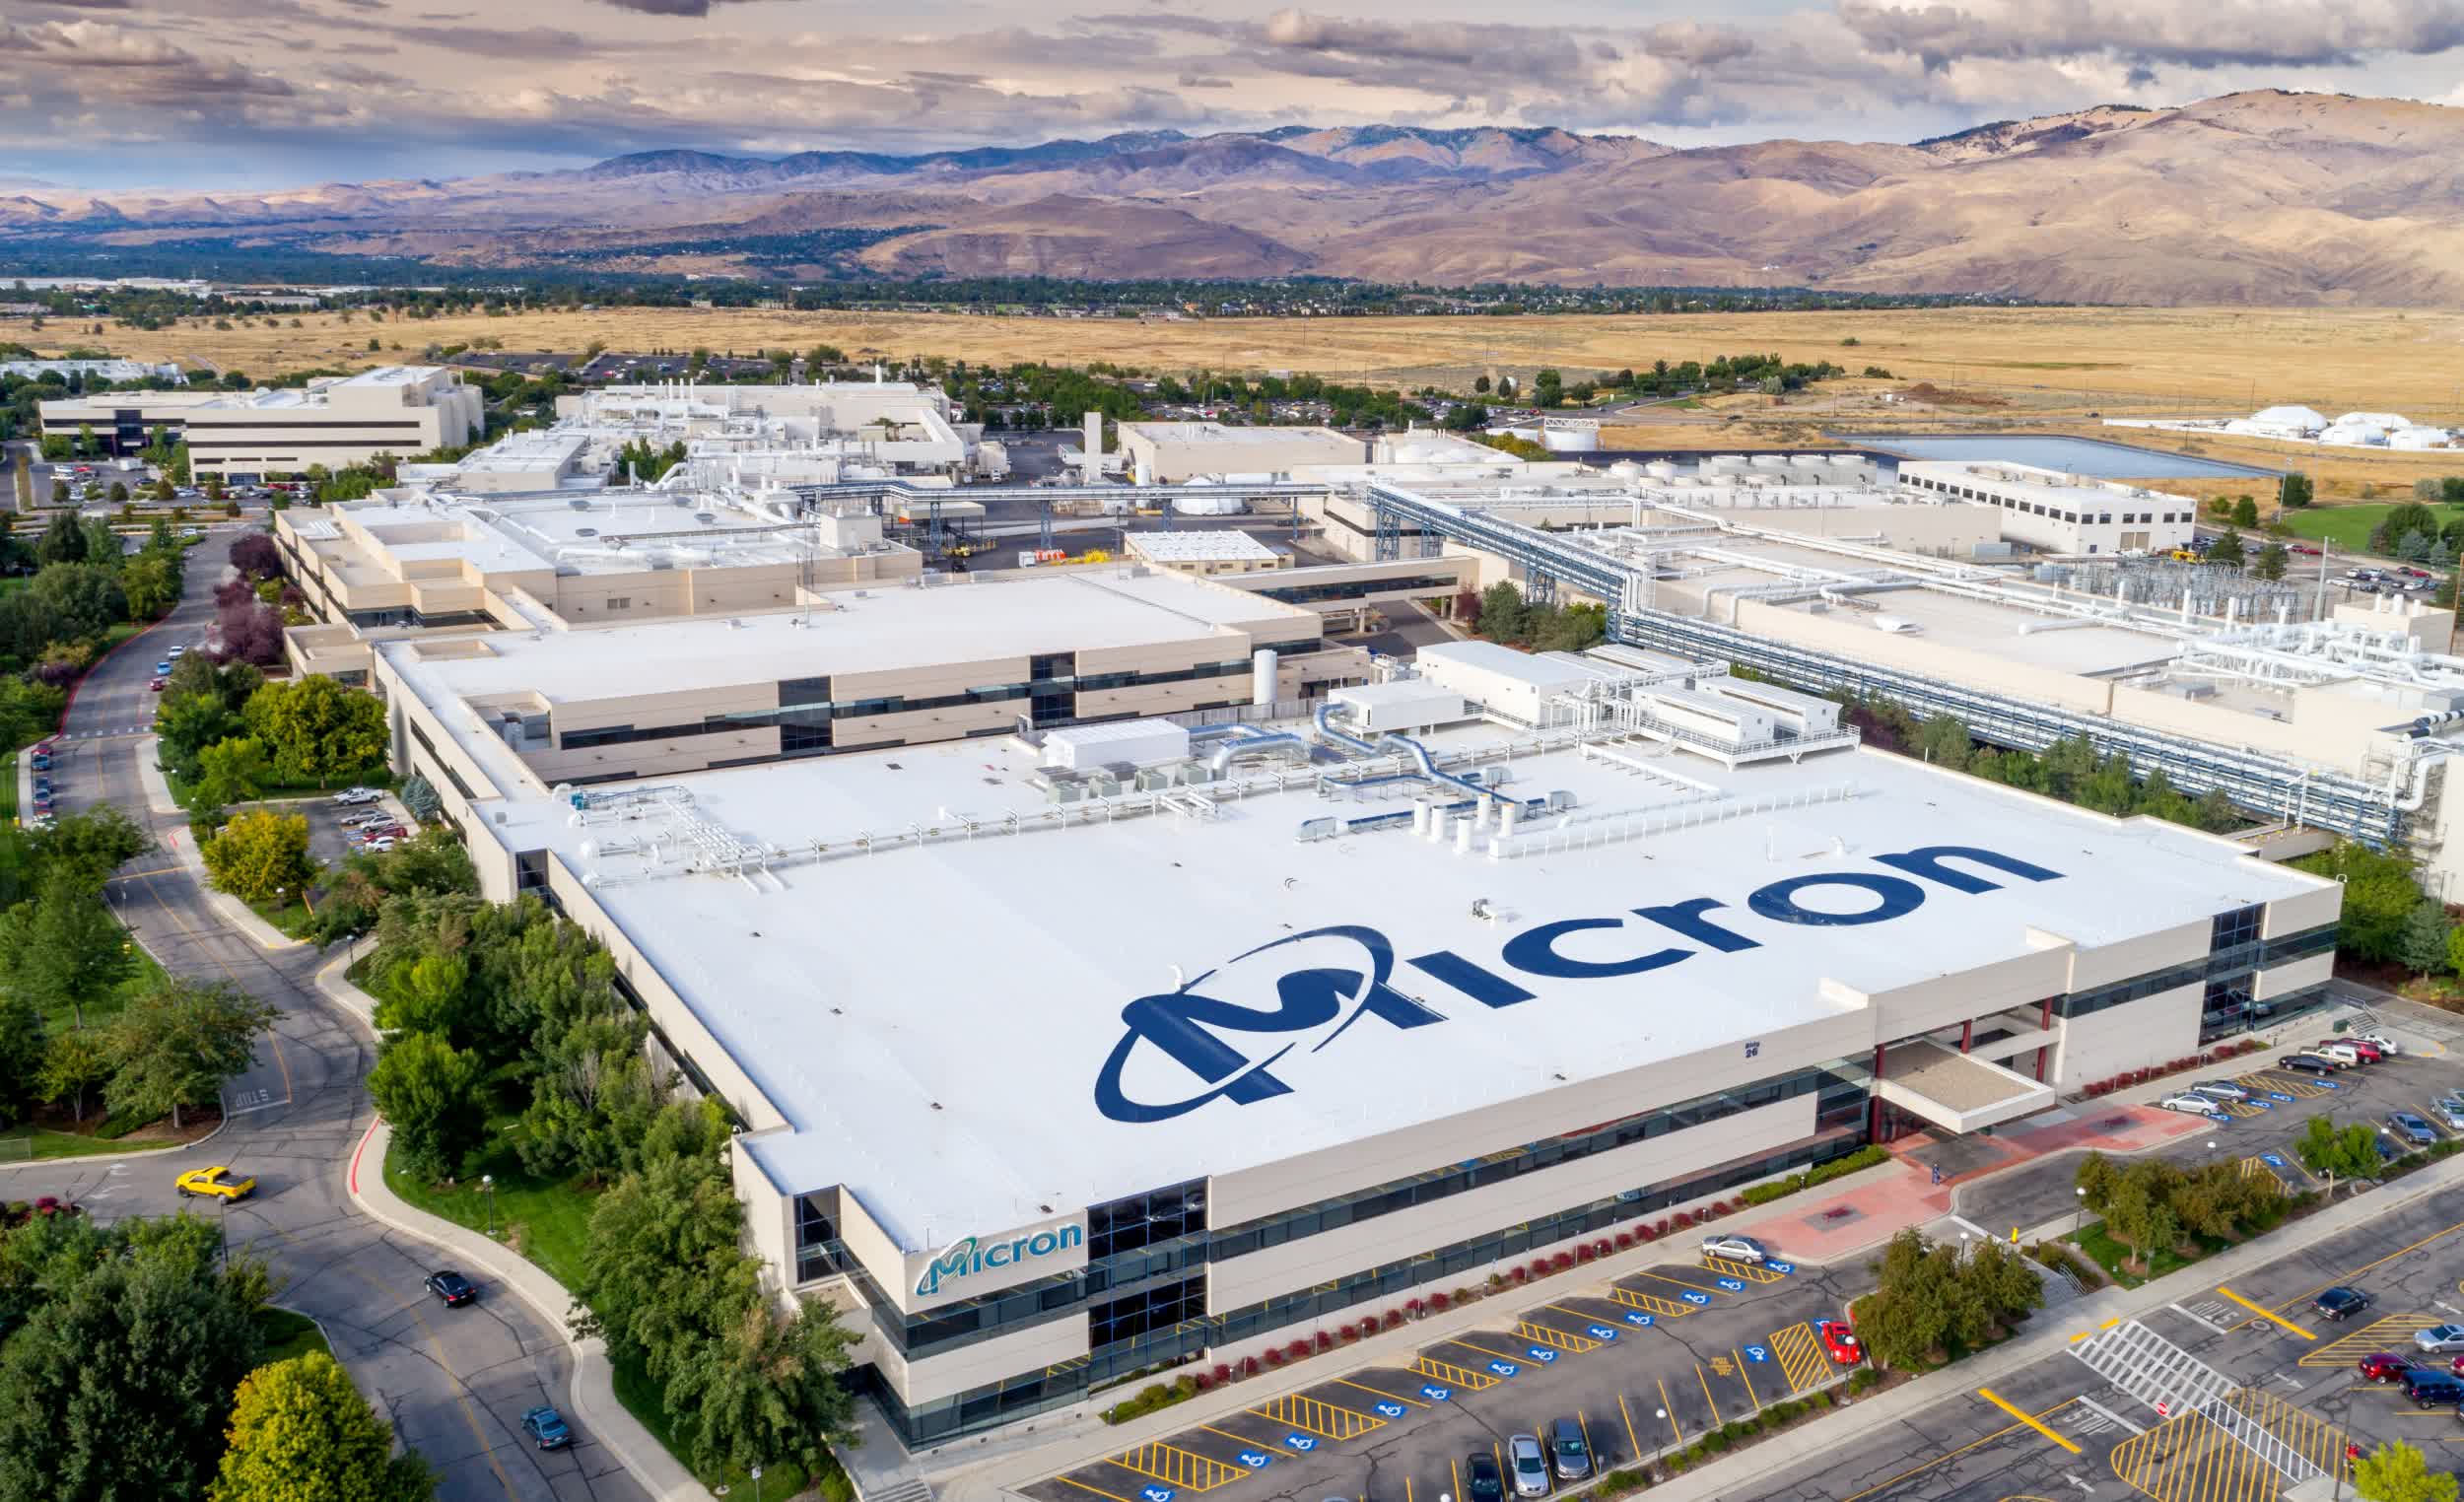 Micron is selling its former 3D XPoint fab to Texas Instruments for $900 million